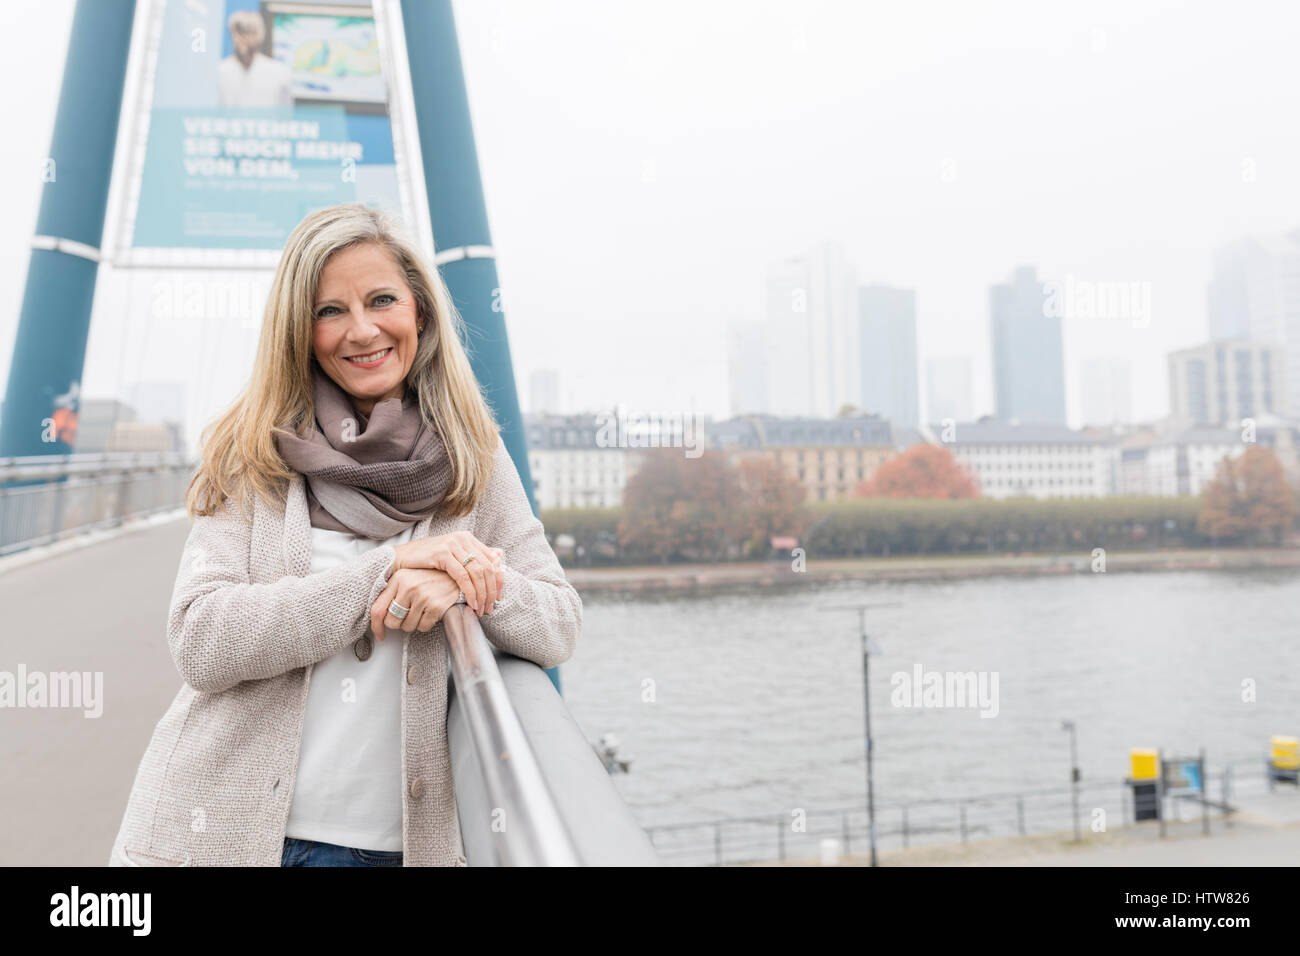 Middle-aged woman standing on a bridge Stock Photo